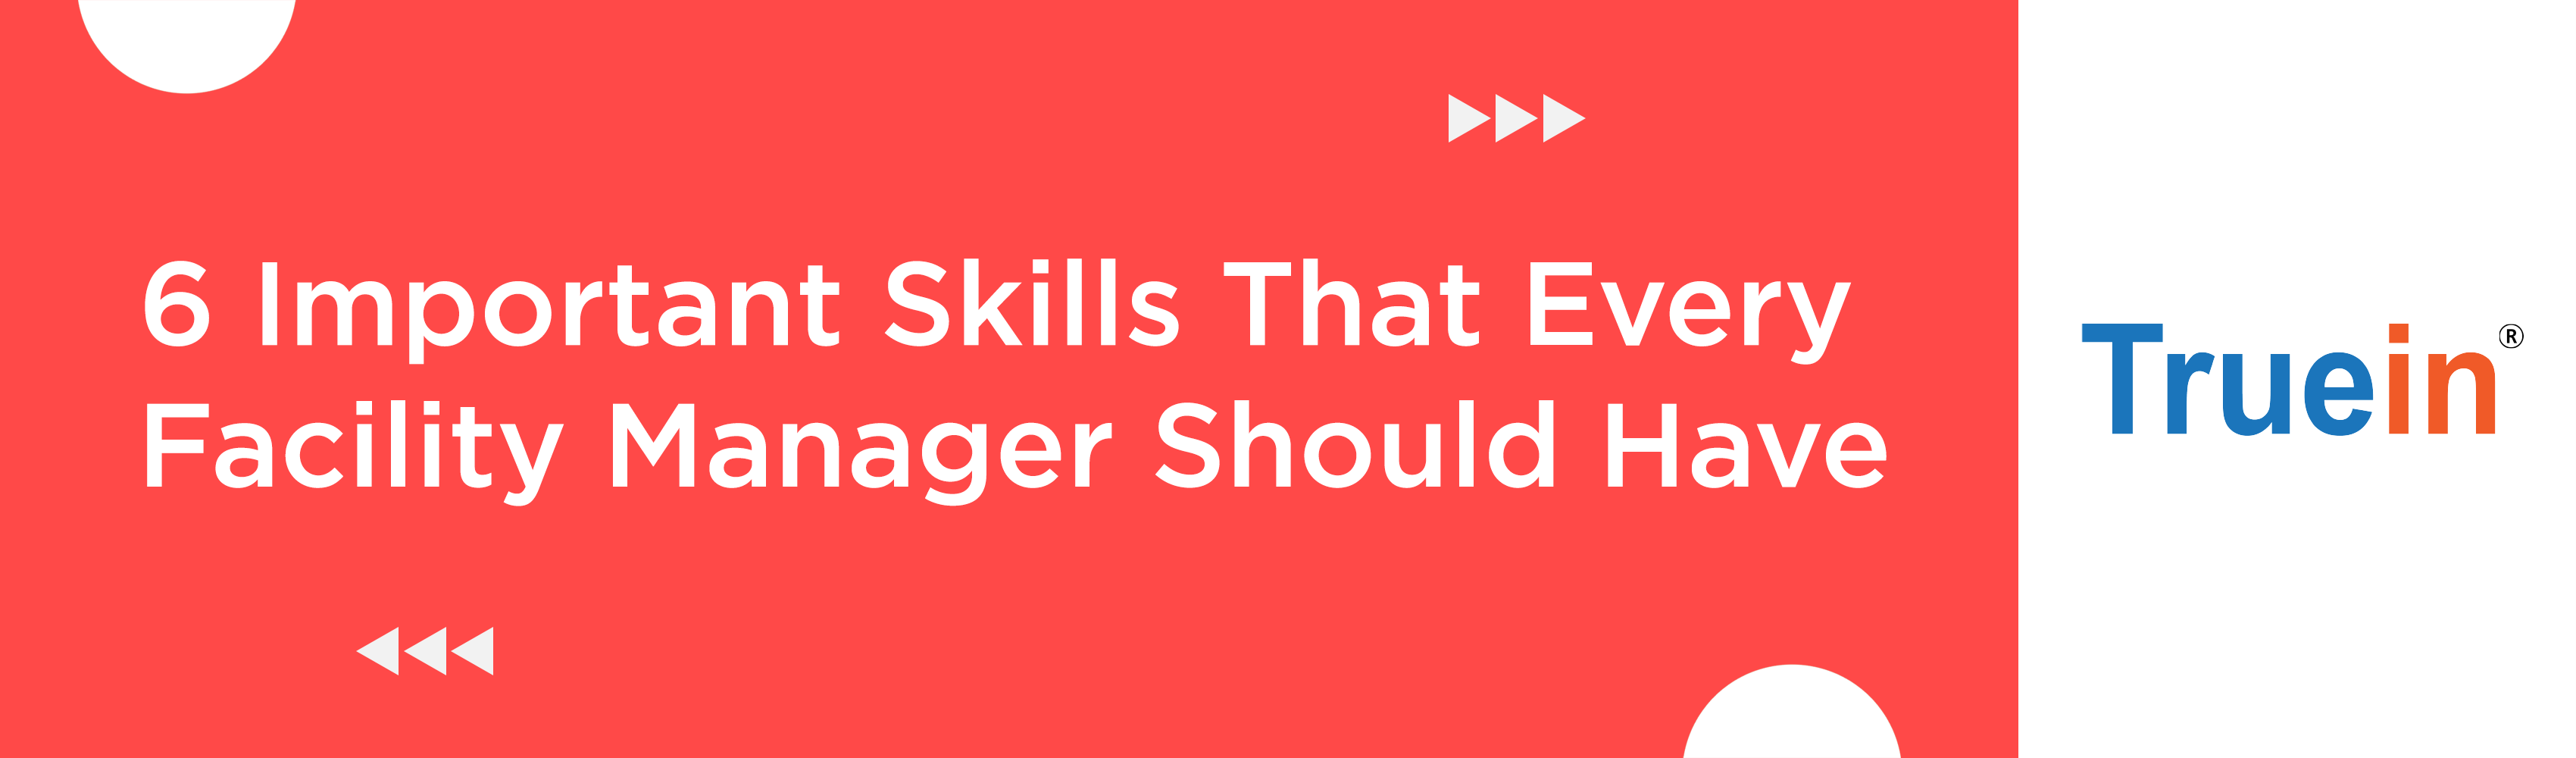 6 Important Skills That Every Facility Manager Should Have